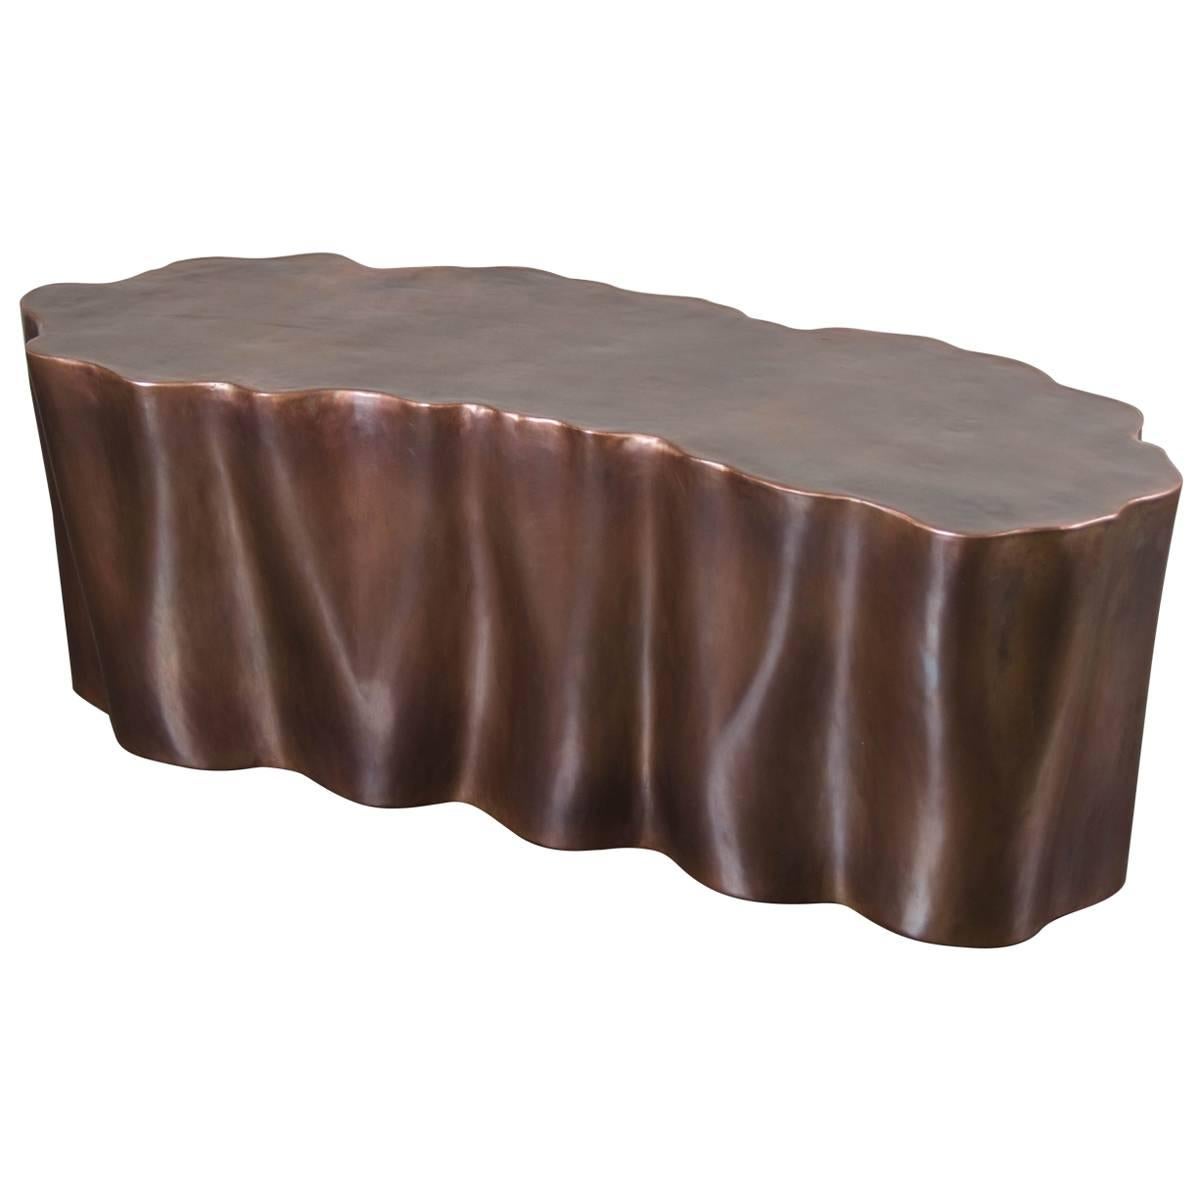 Lotus Leaf Bench by Robert Kuo, Antique Copper, Limited Edition